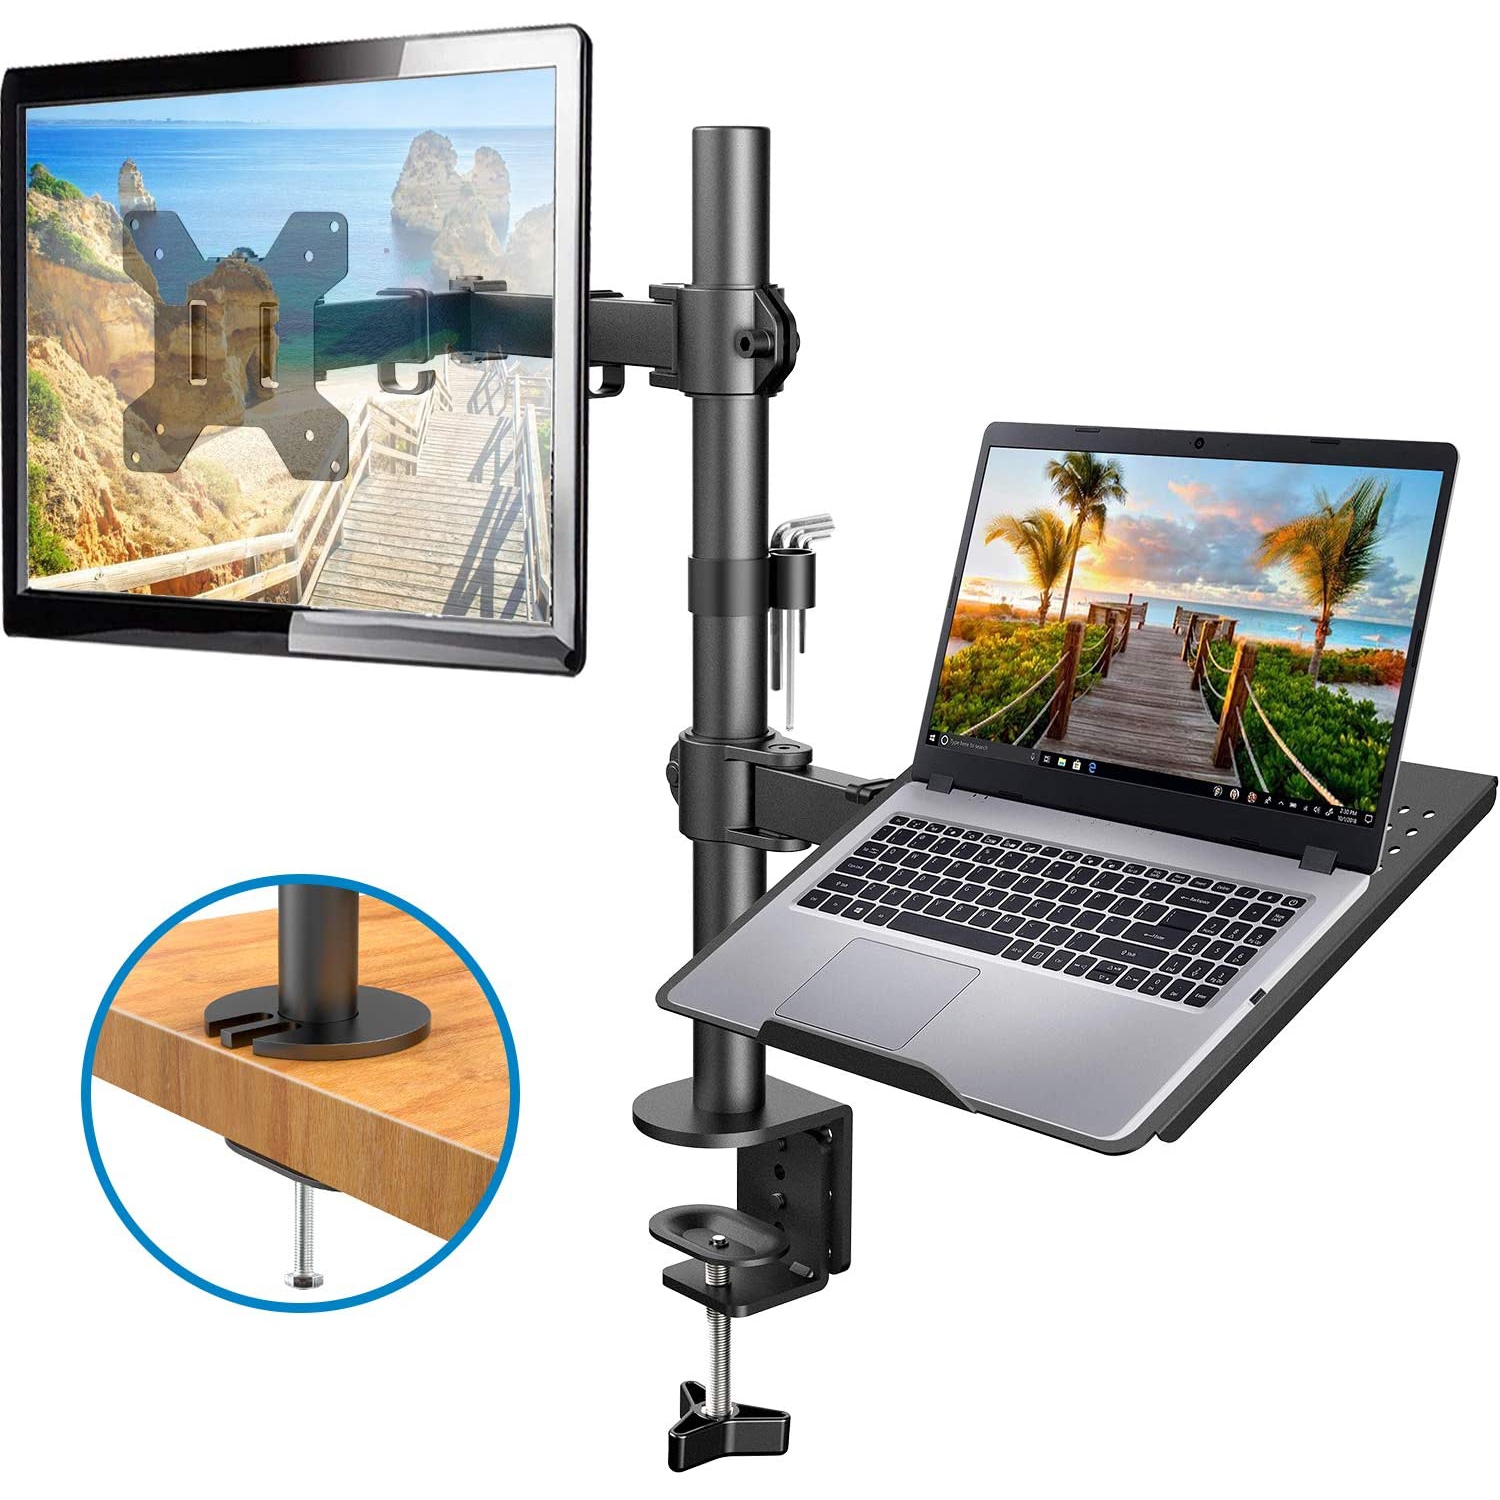 HUANUO Monitor Stand Black 2 Pieces Laptop Stand for Computer/Laptop/Printer Monitor up to a Weight of 30 kg 